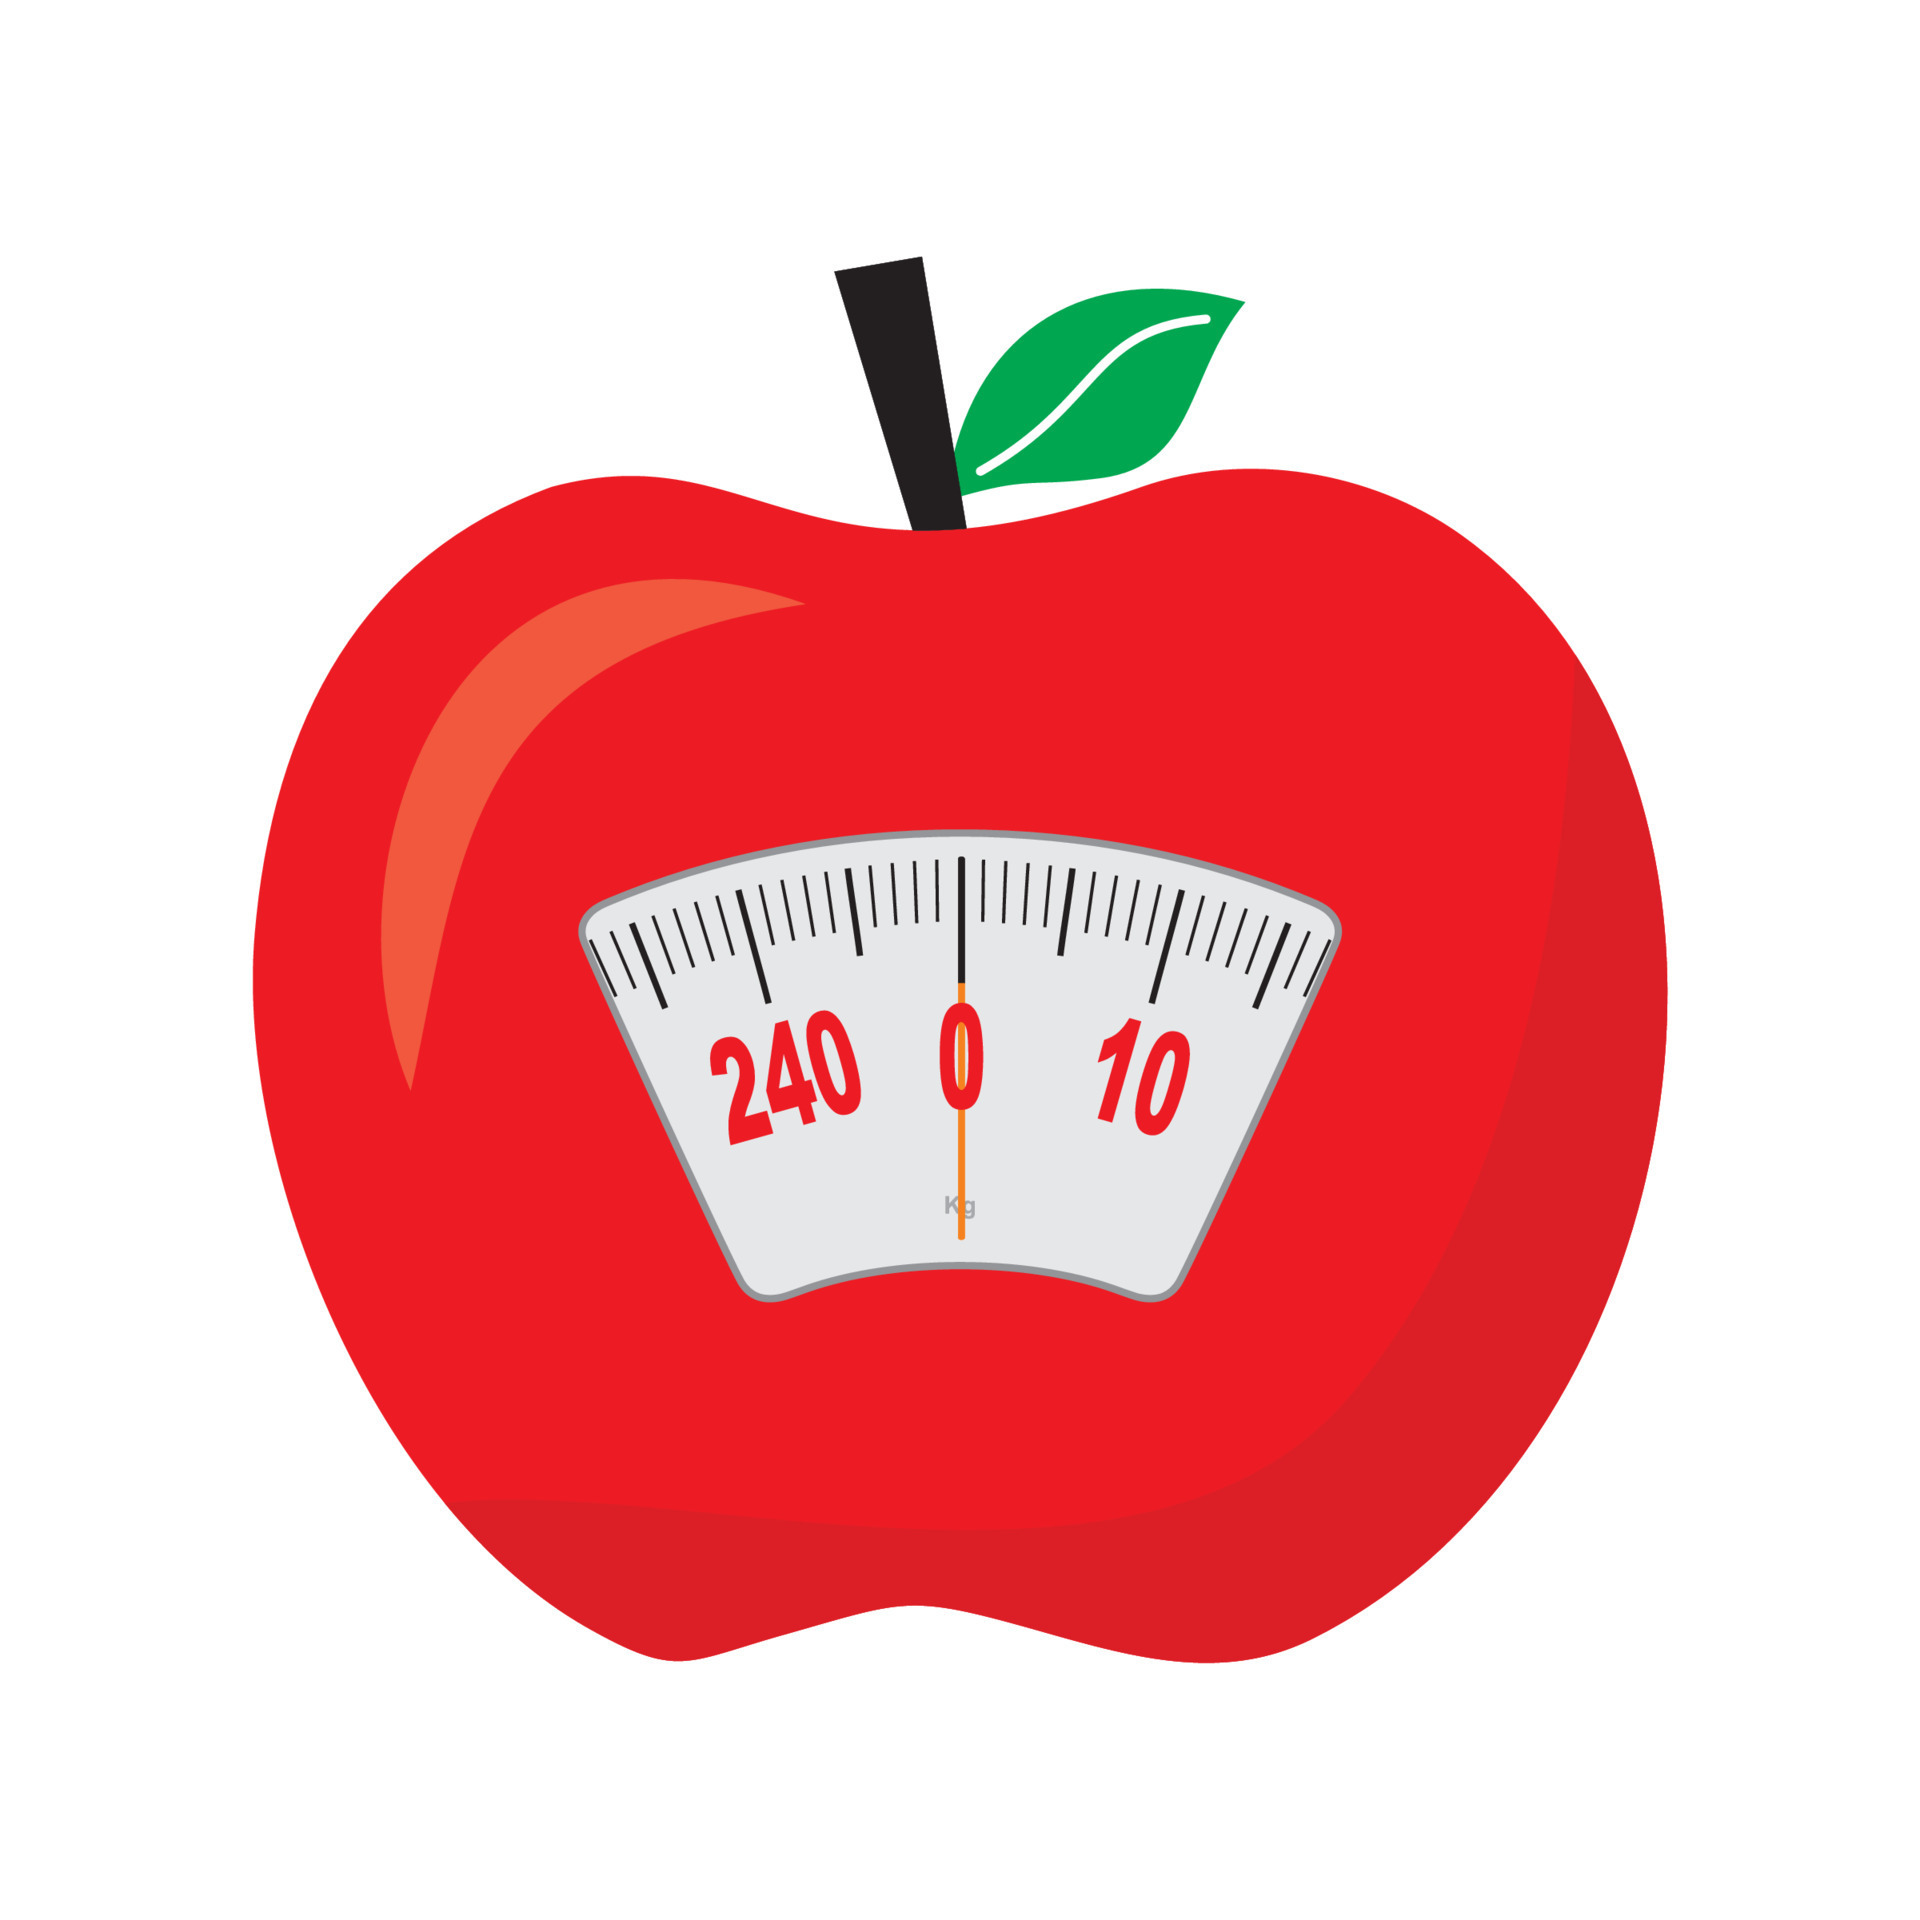 https://static.vecteezy.com/system/resources/previews/013/529/155/original/apple-diet-icon-illustration-red-apples-and-scales-apple-diet-menu-isolated-white-fitness-and-gym-icons-concept-weight-loss-healthy-lifestyle-proper-nutrition-vector.jpg